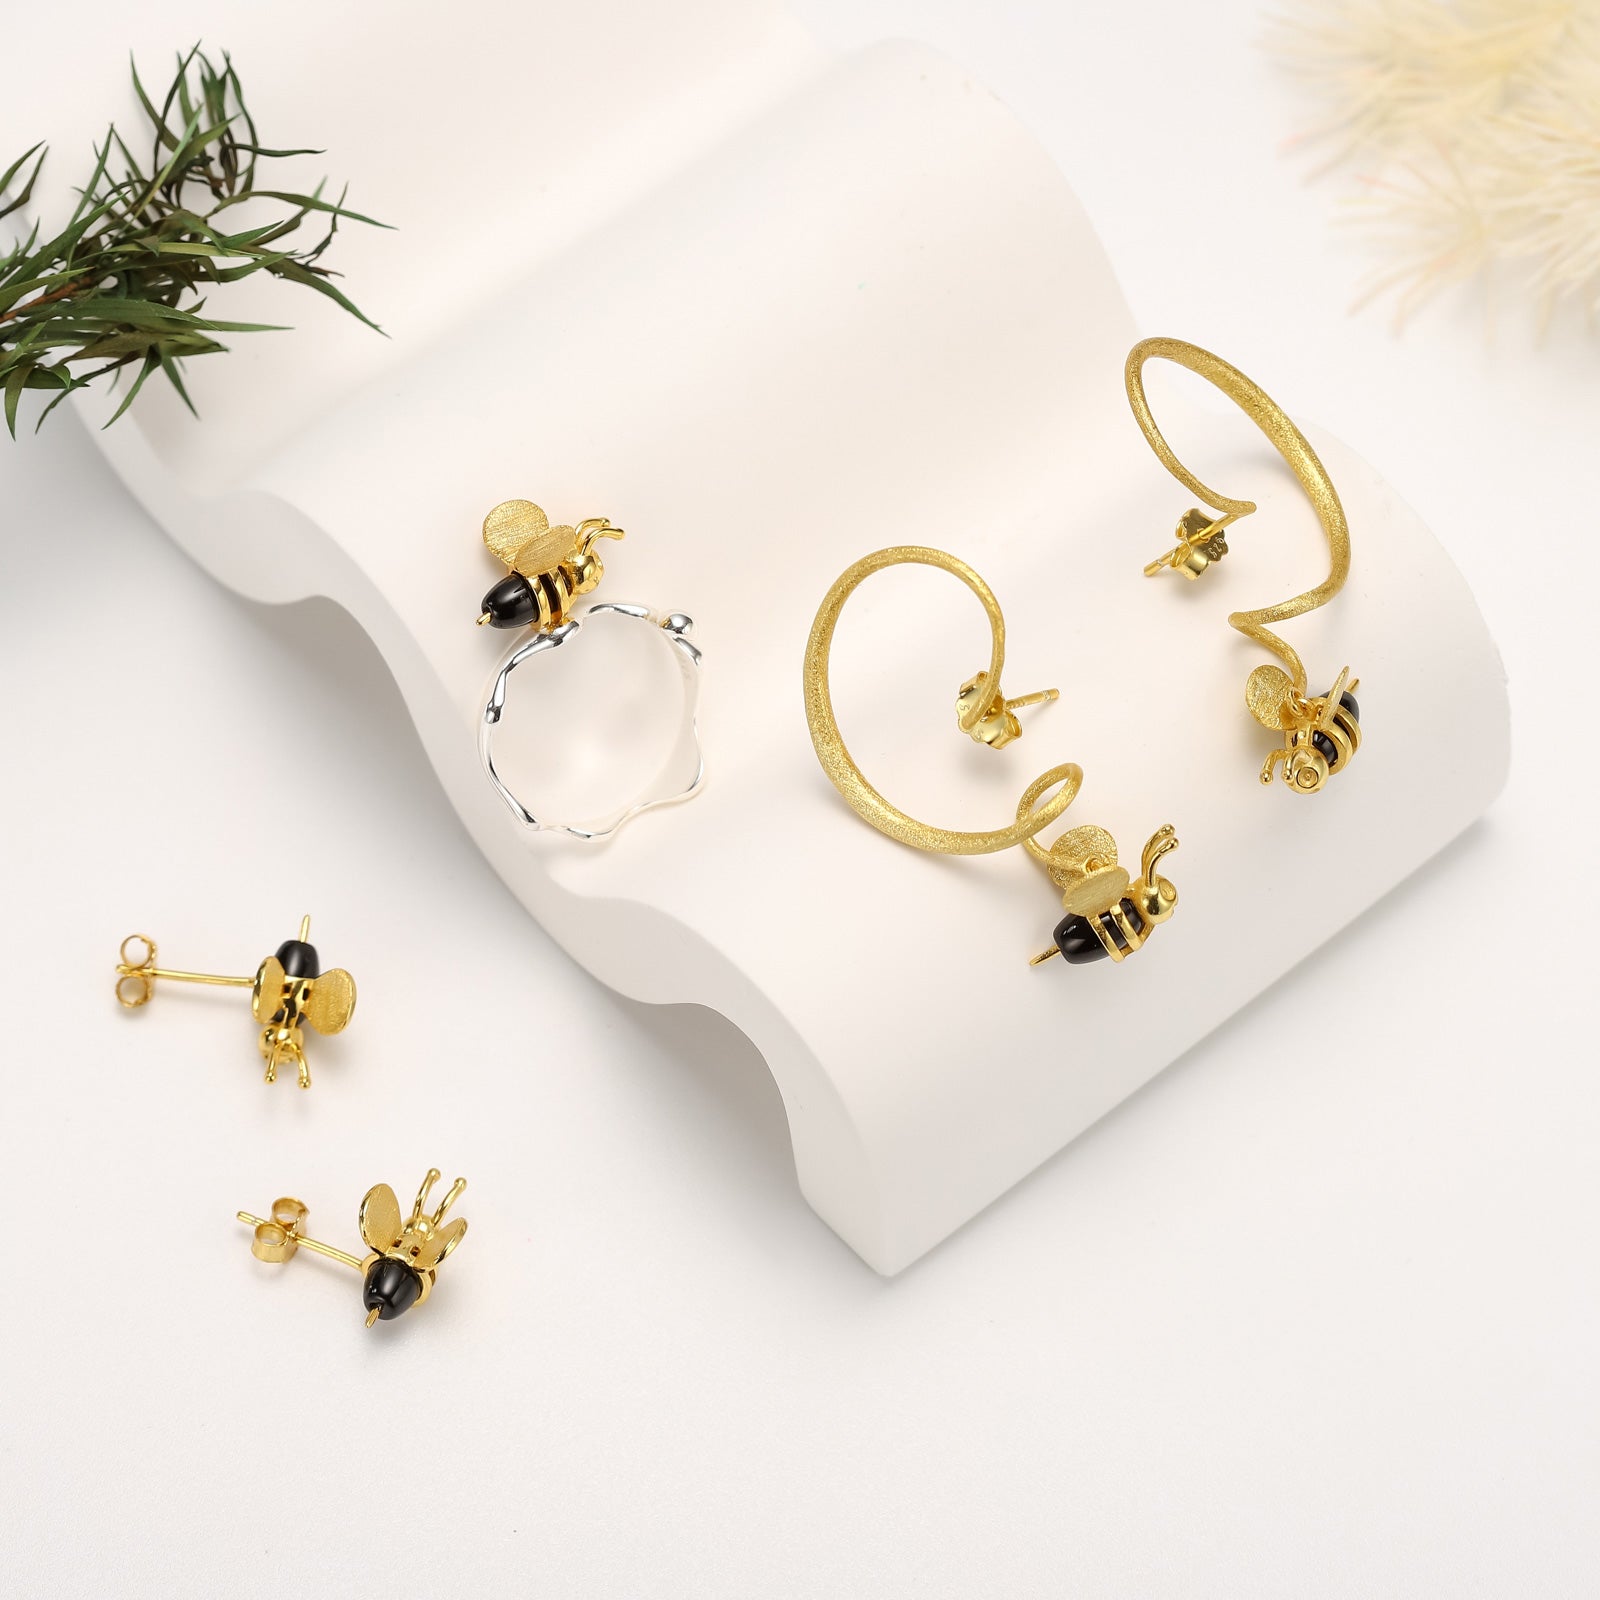 Bee & Dripping Honey Sterling Silver Jewelry Set